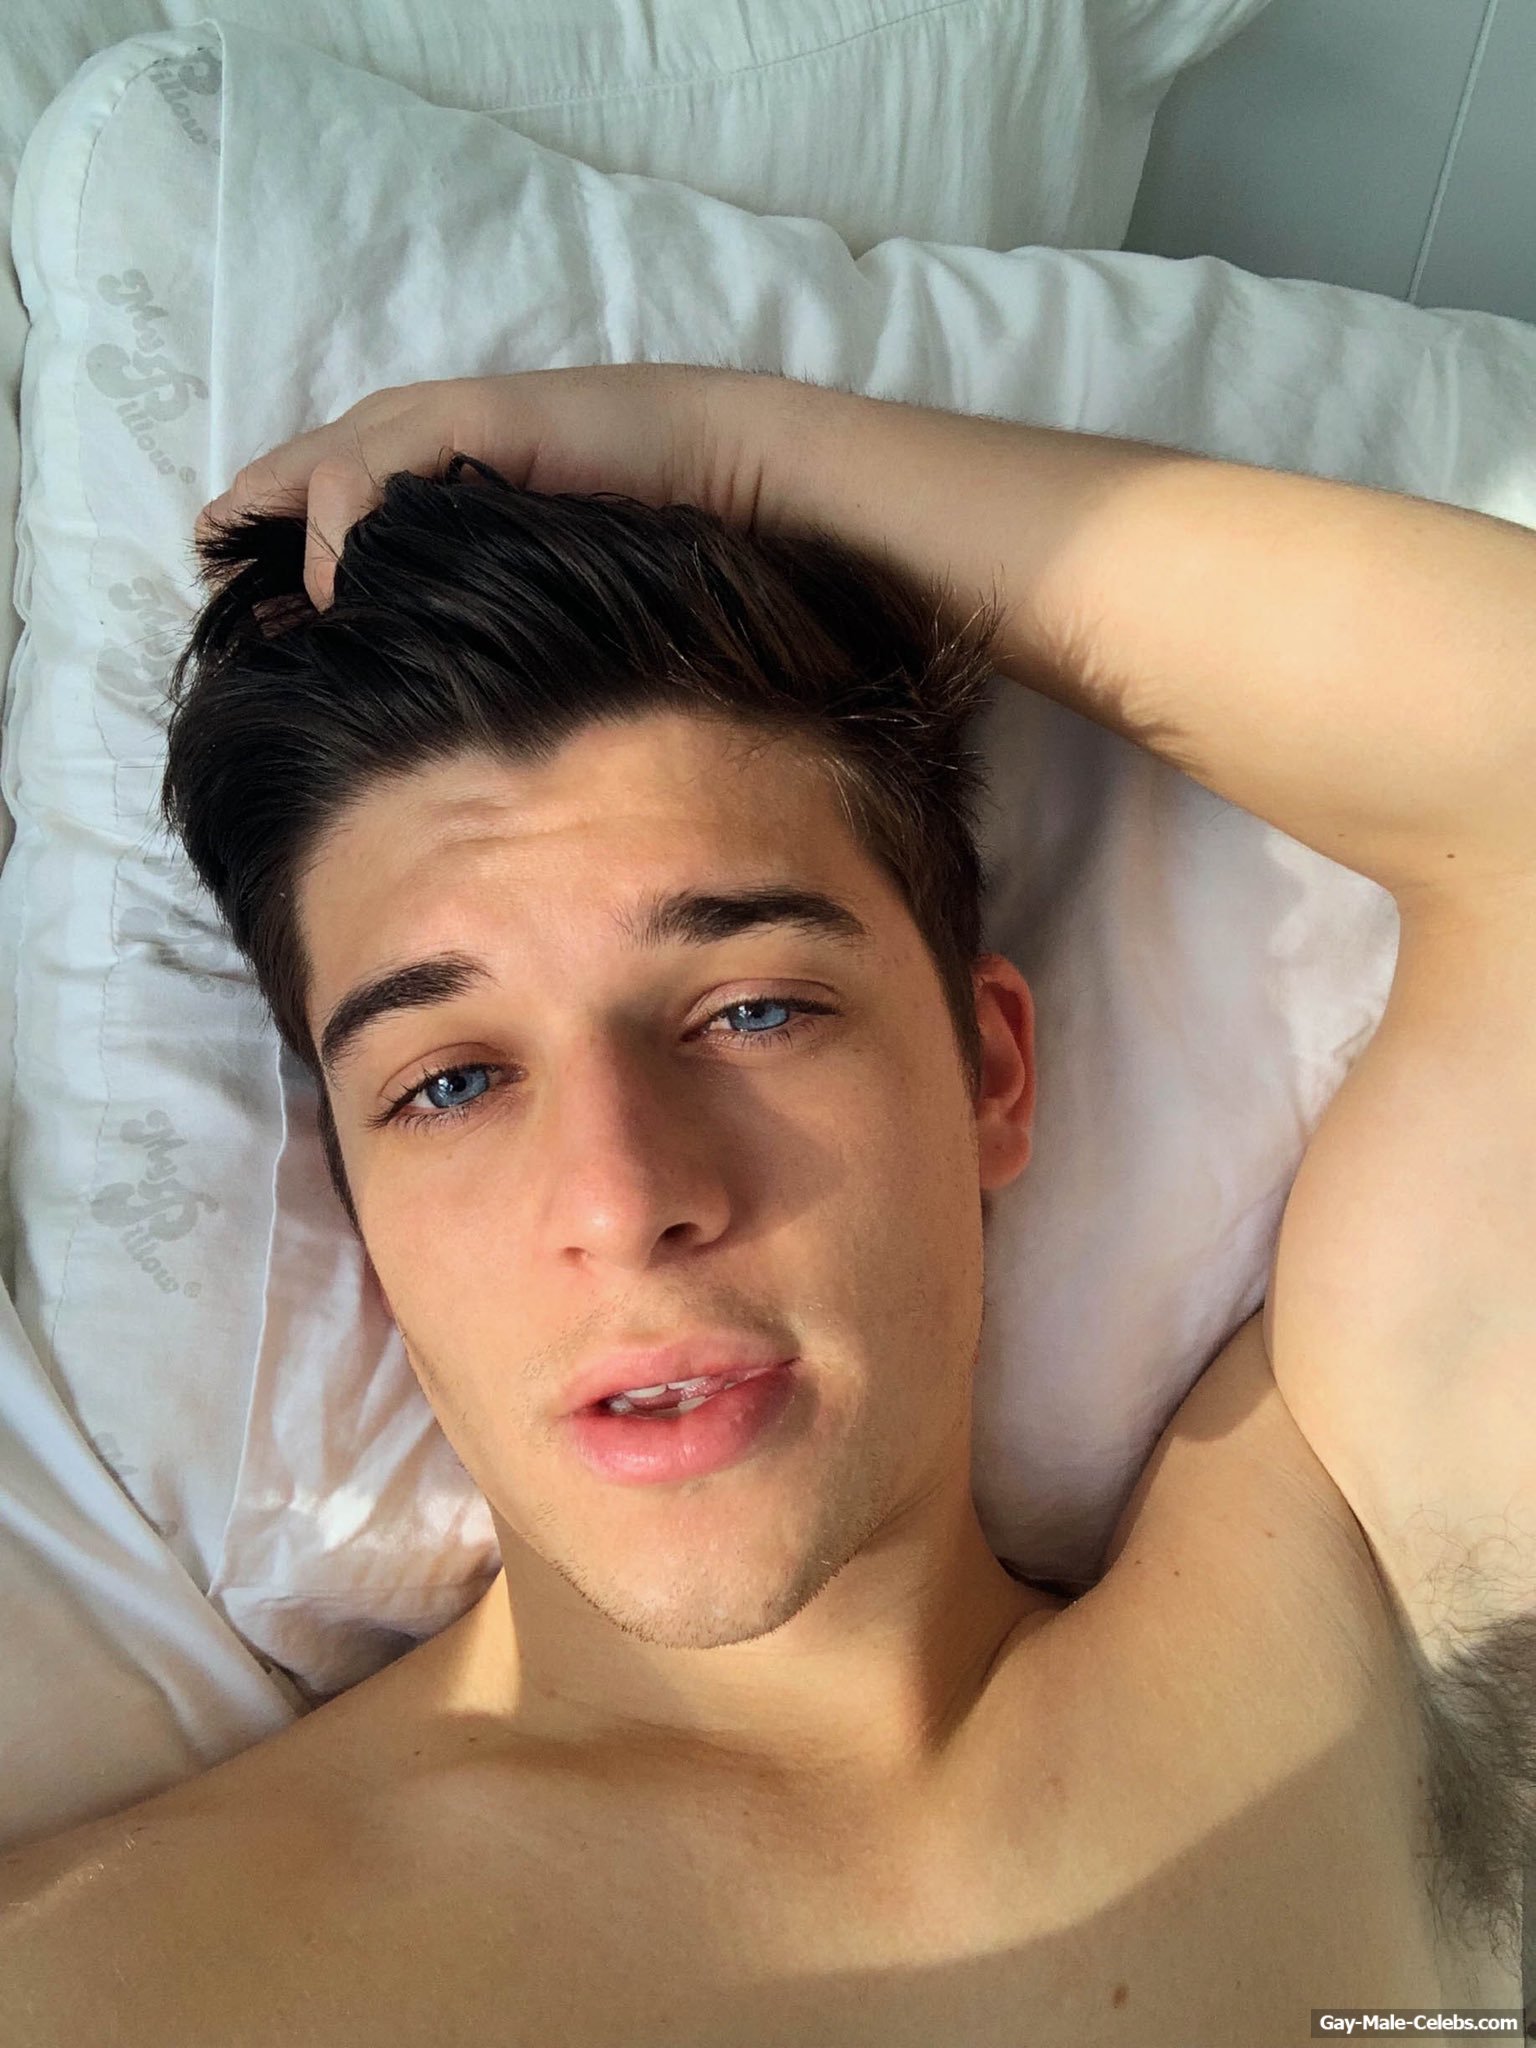 Sean O’Donnell New Shirtless &amp; Bulge Selfies